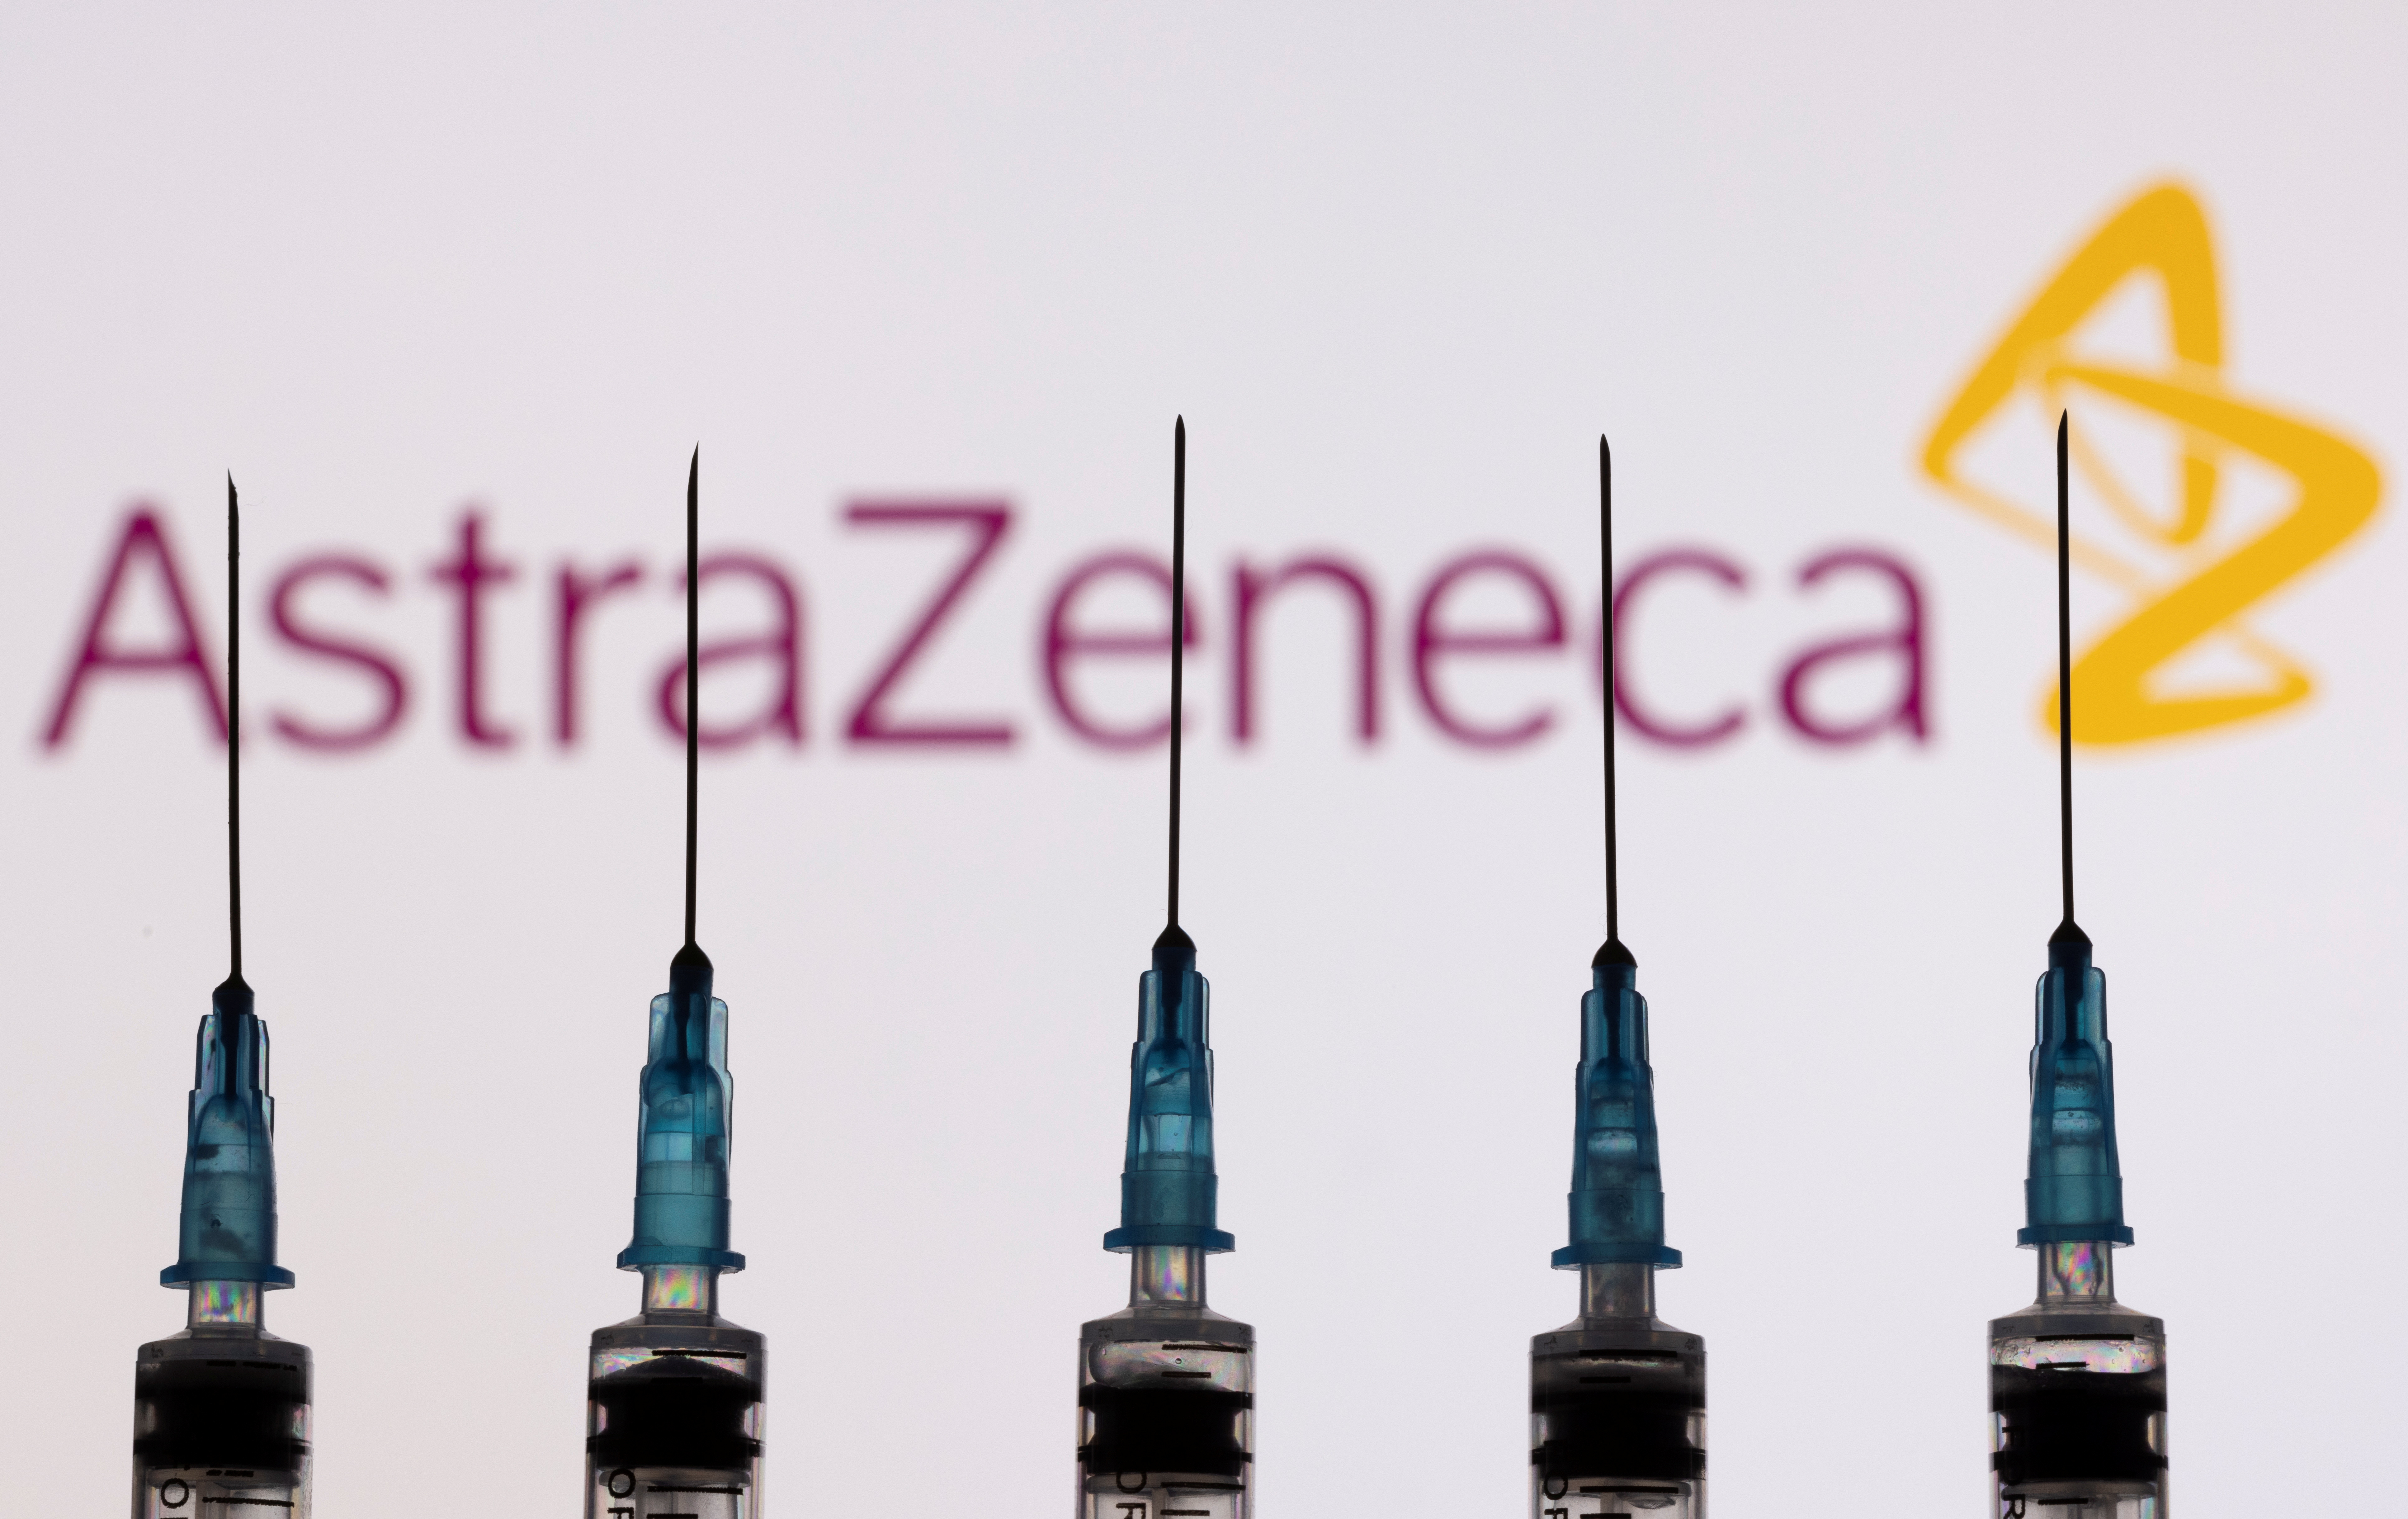 Should you be worried about the AstraZeneca vaccine? Here’s what the experts say